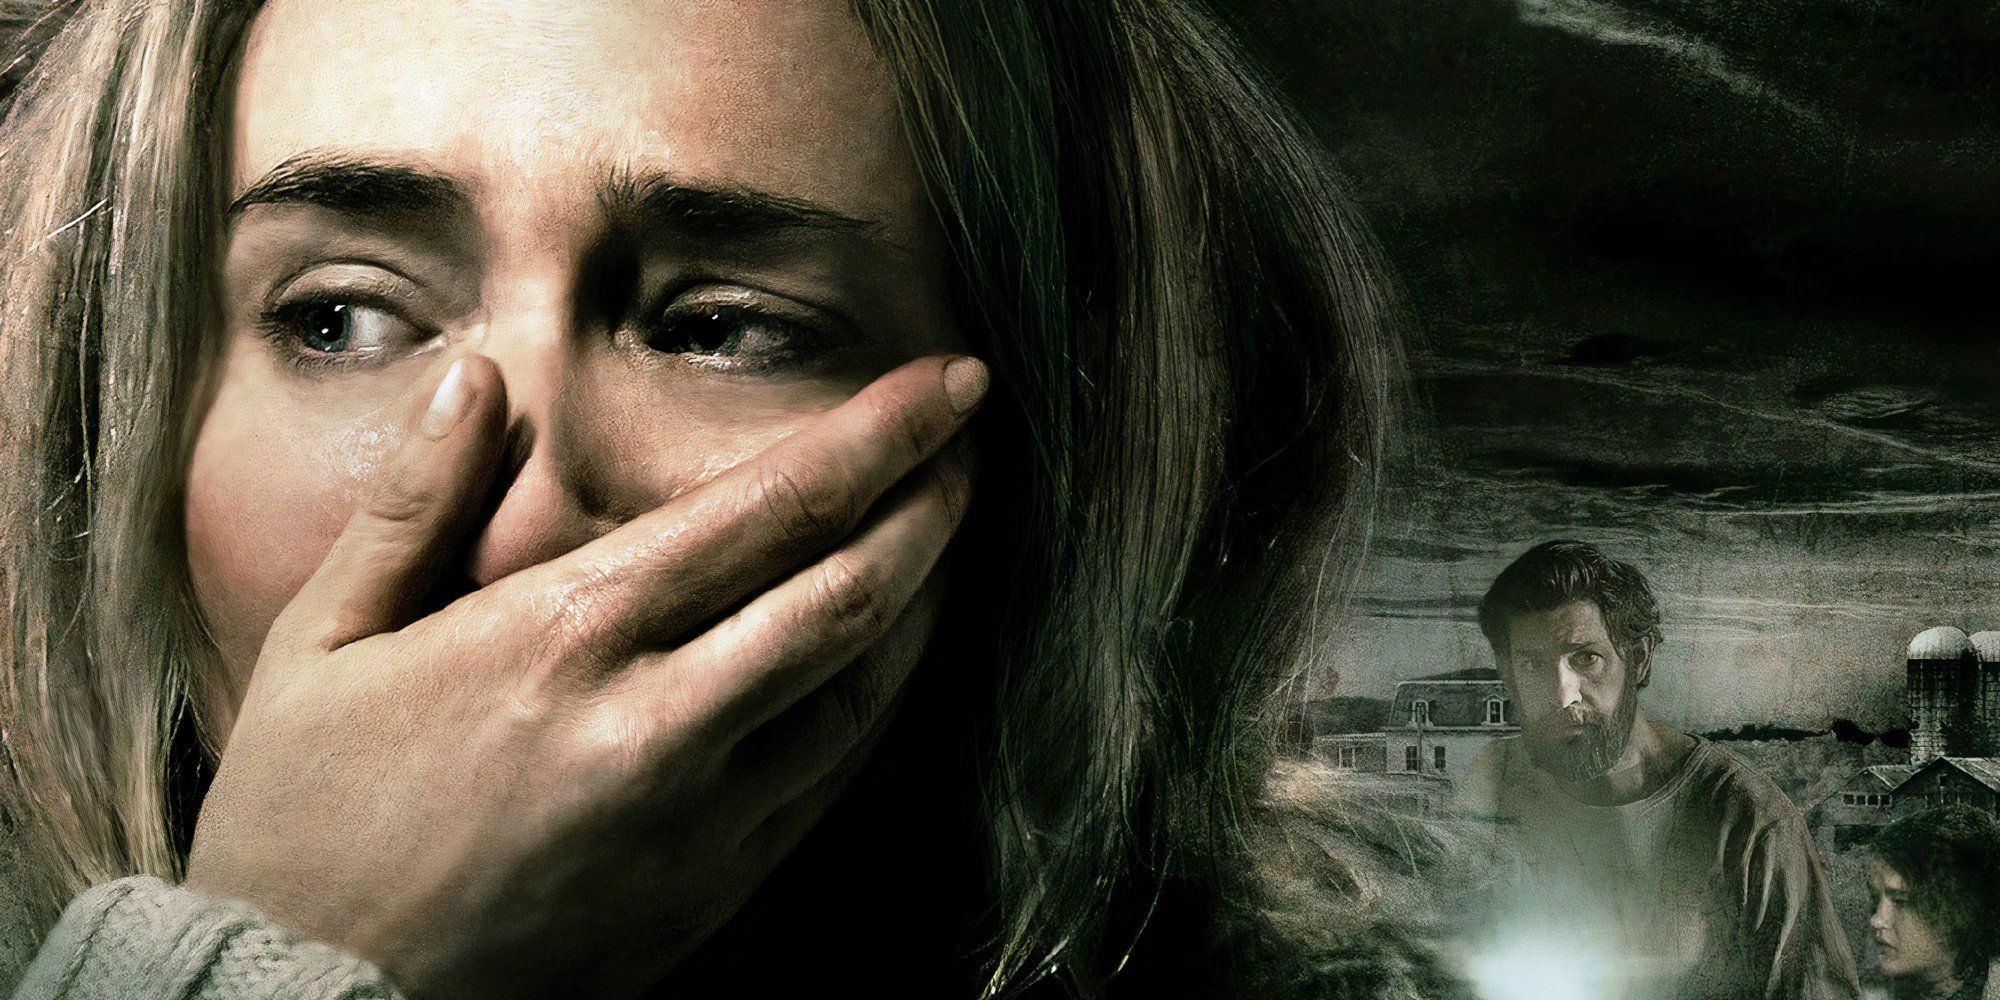 Emily Blunt with her hand over her mouth on the poster “A Quiet Place”